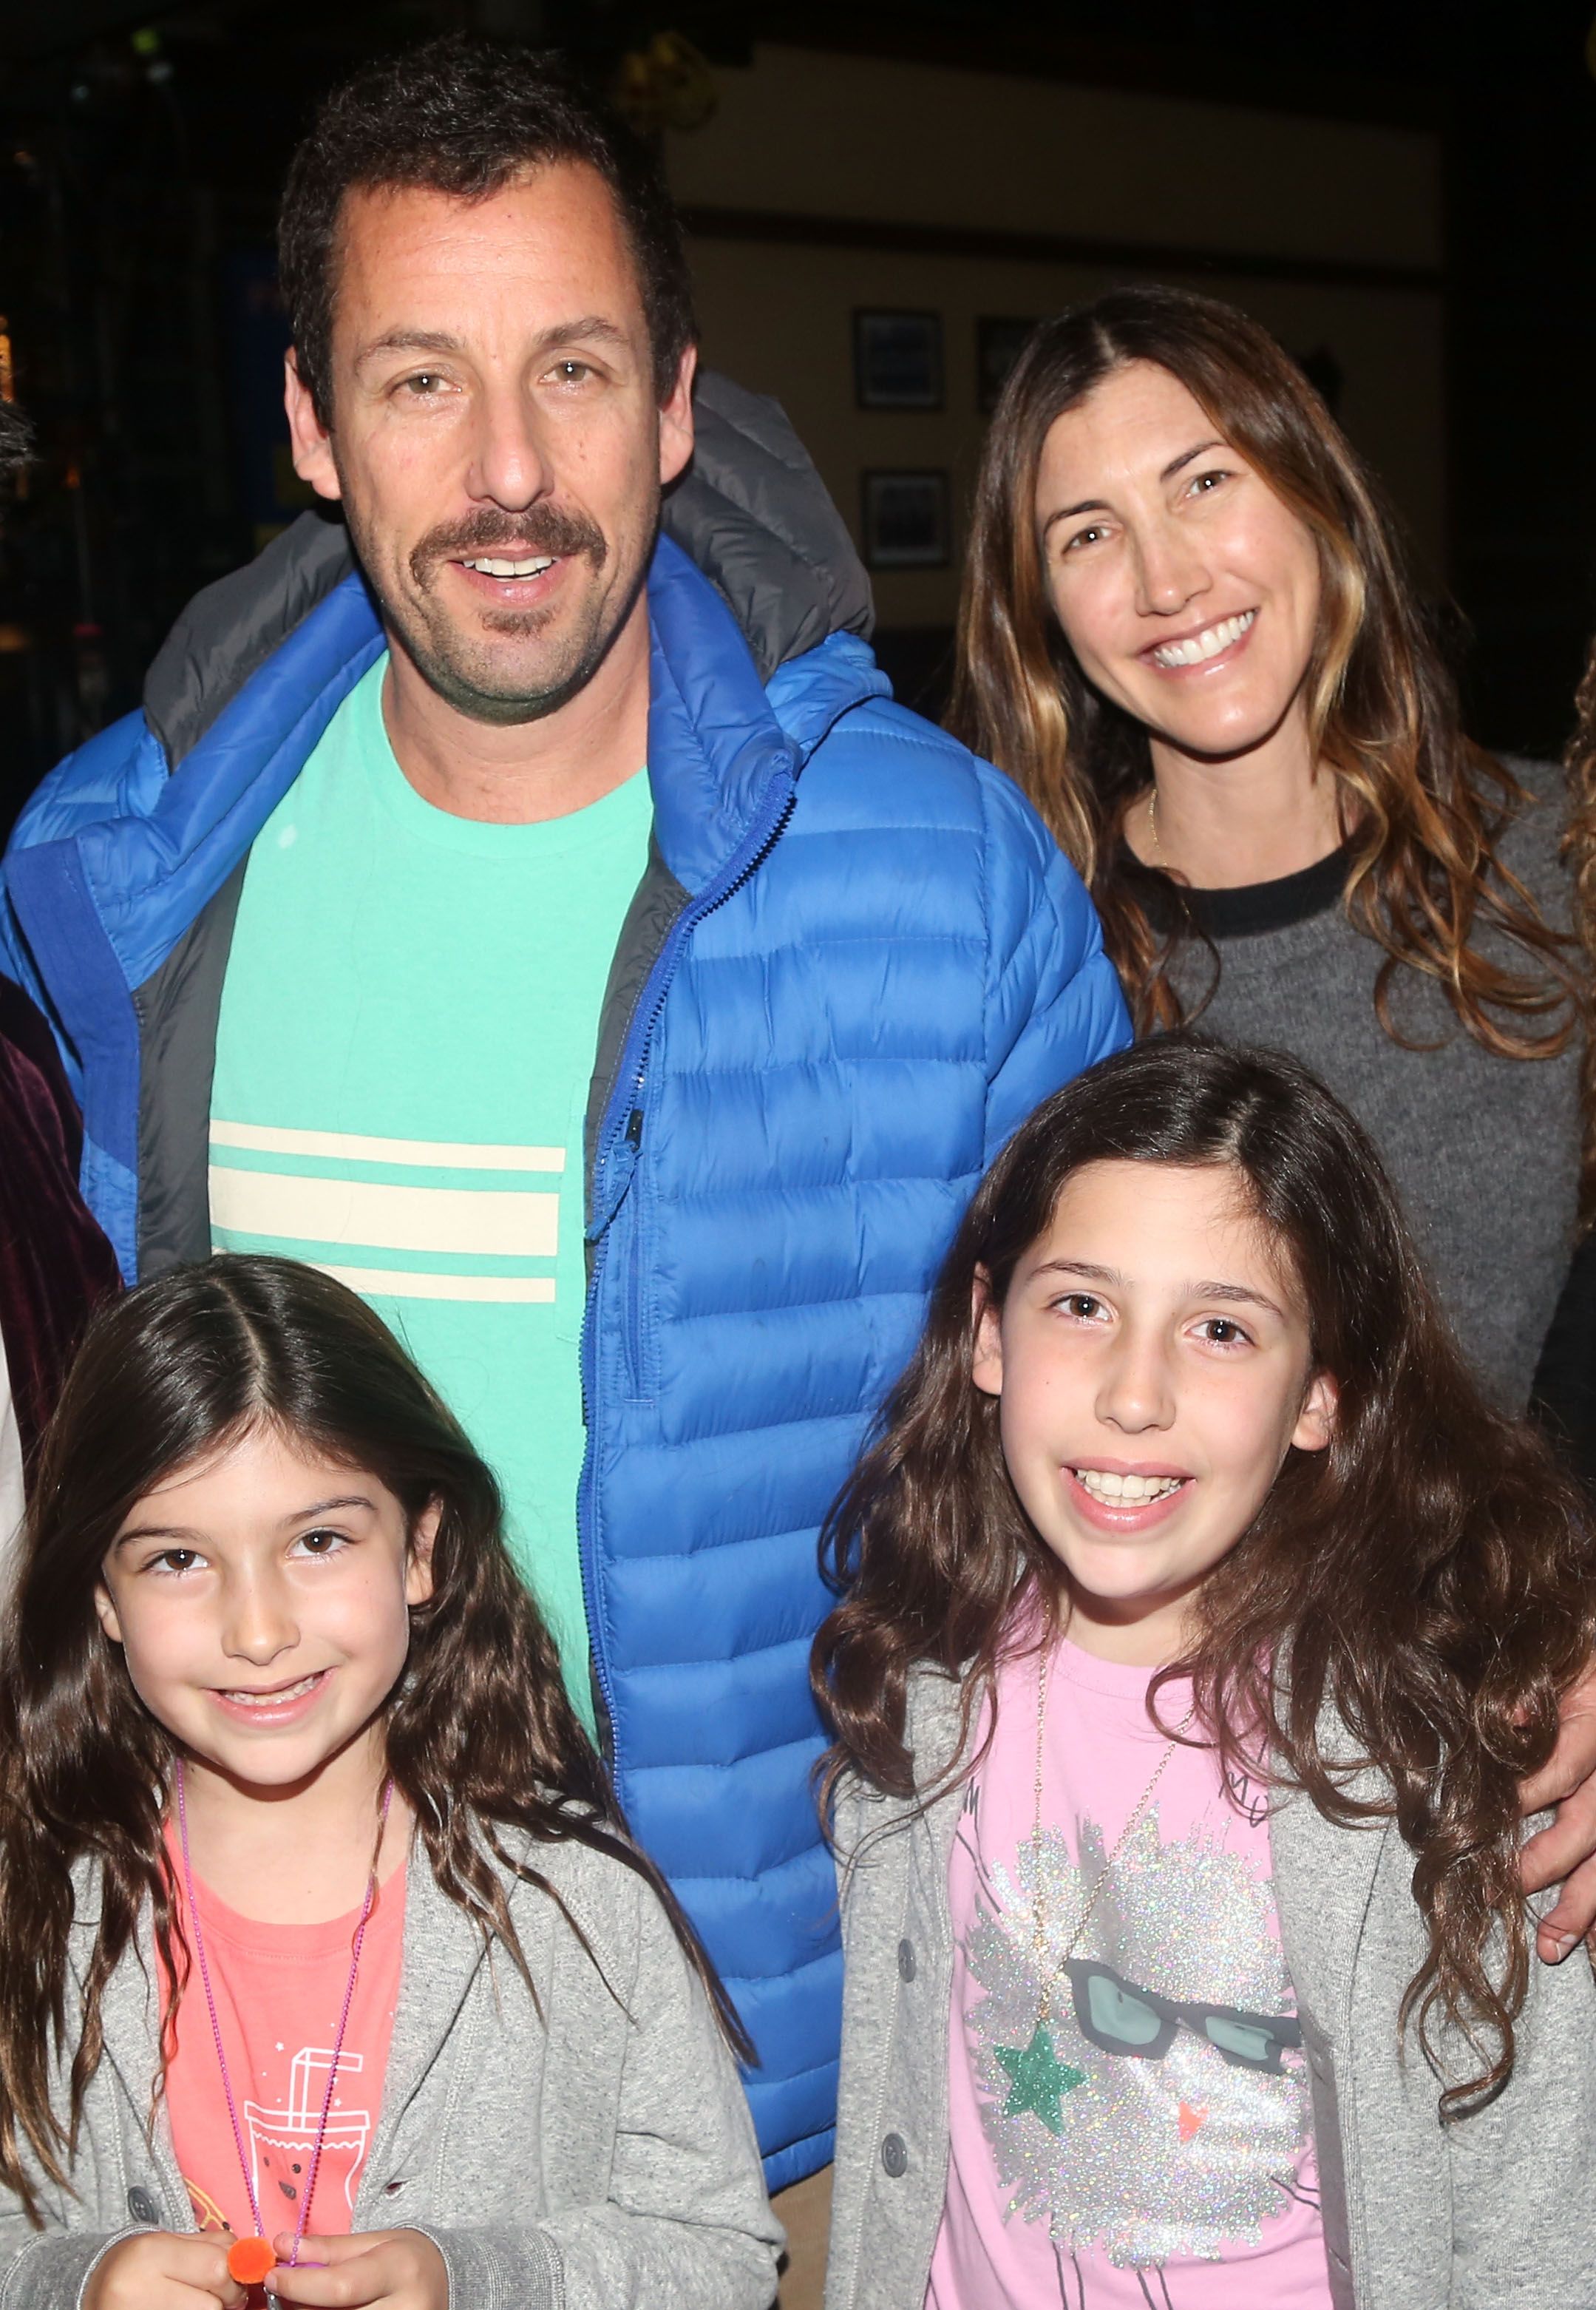 Adam Sandlers Kids Are Not Fans of His Movies пїЅ What to Know about ... pic